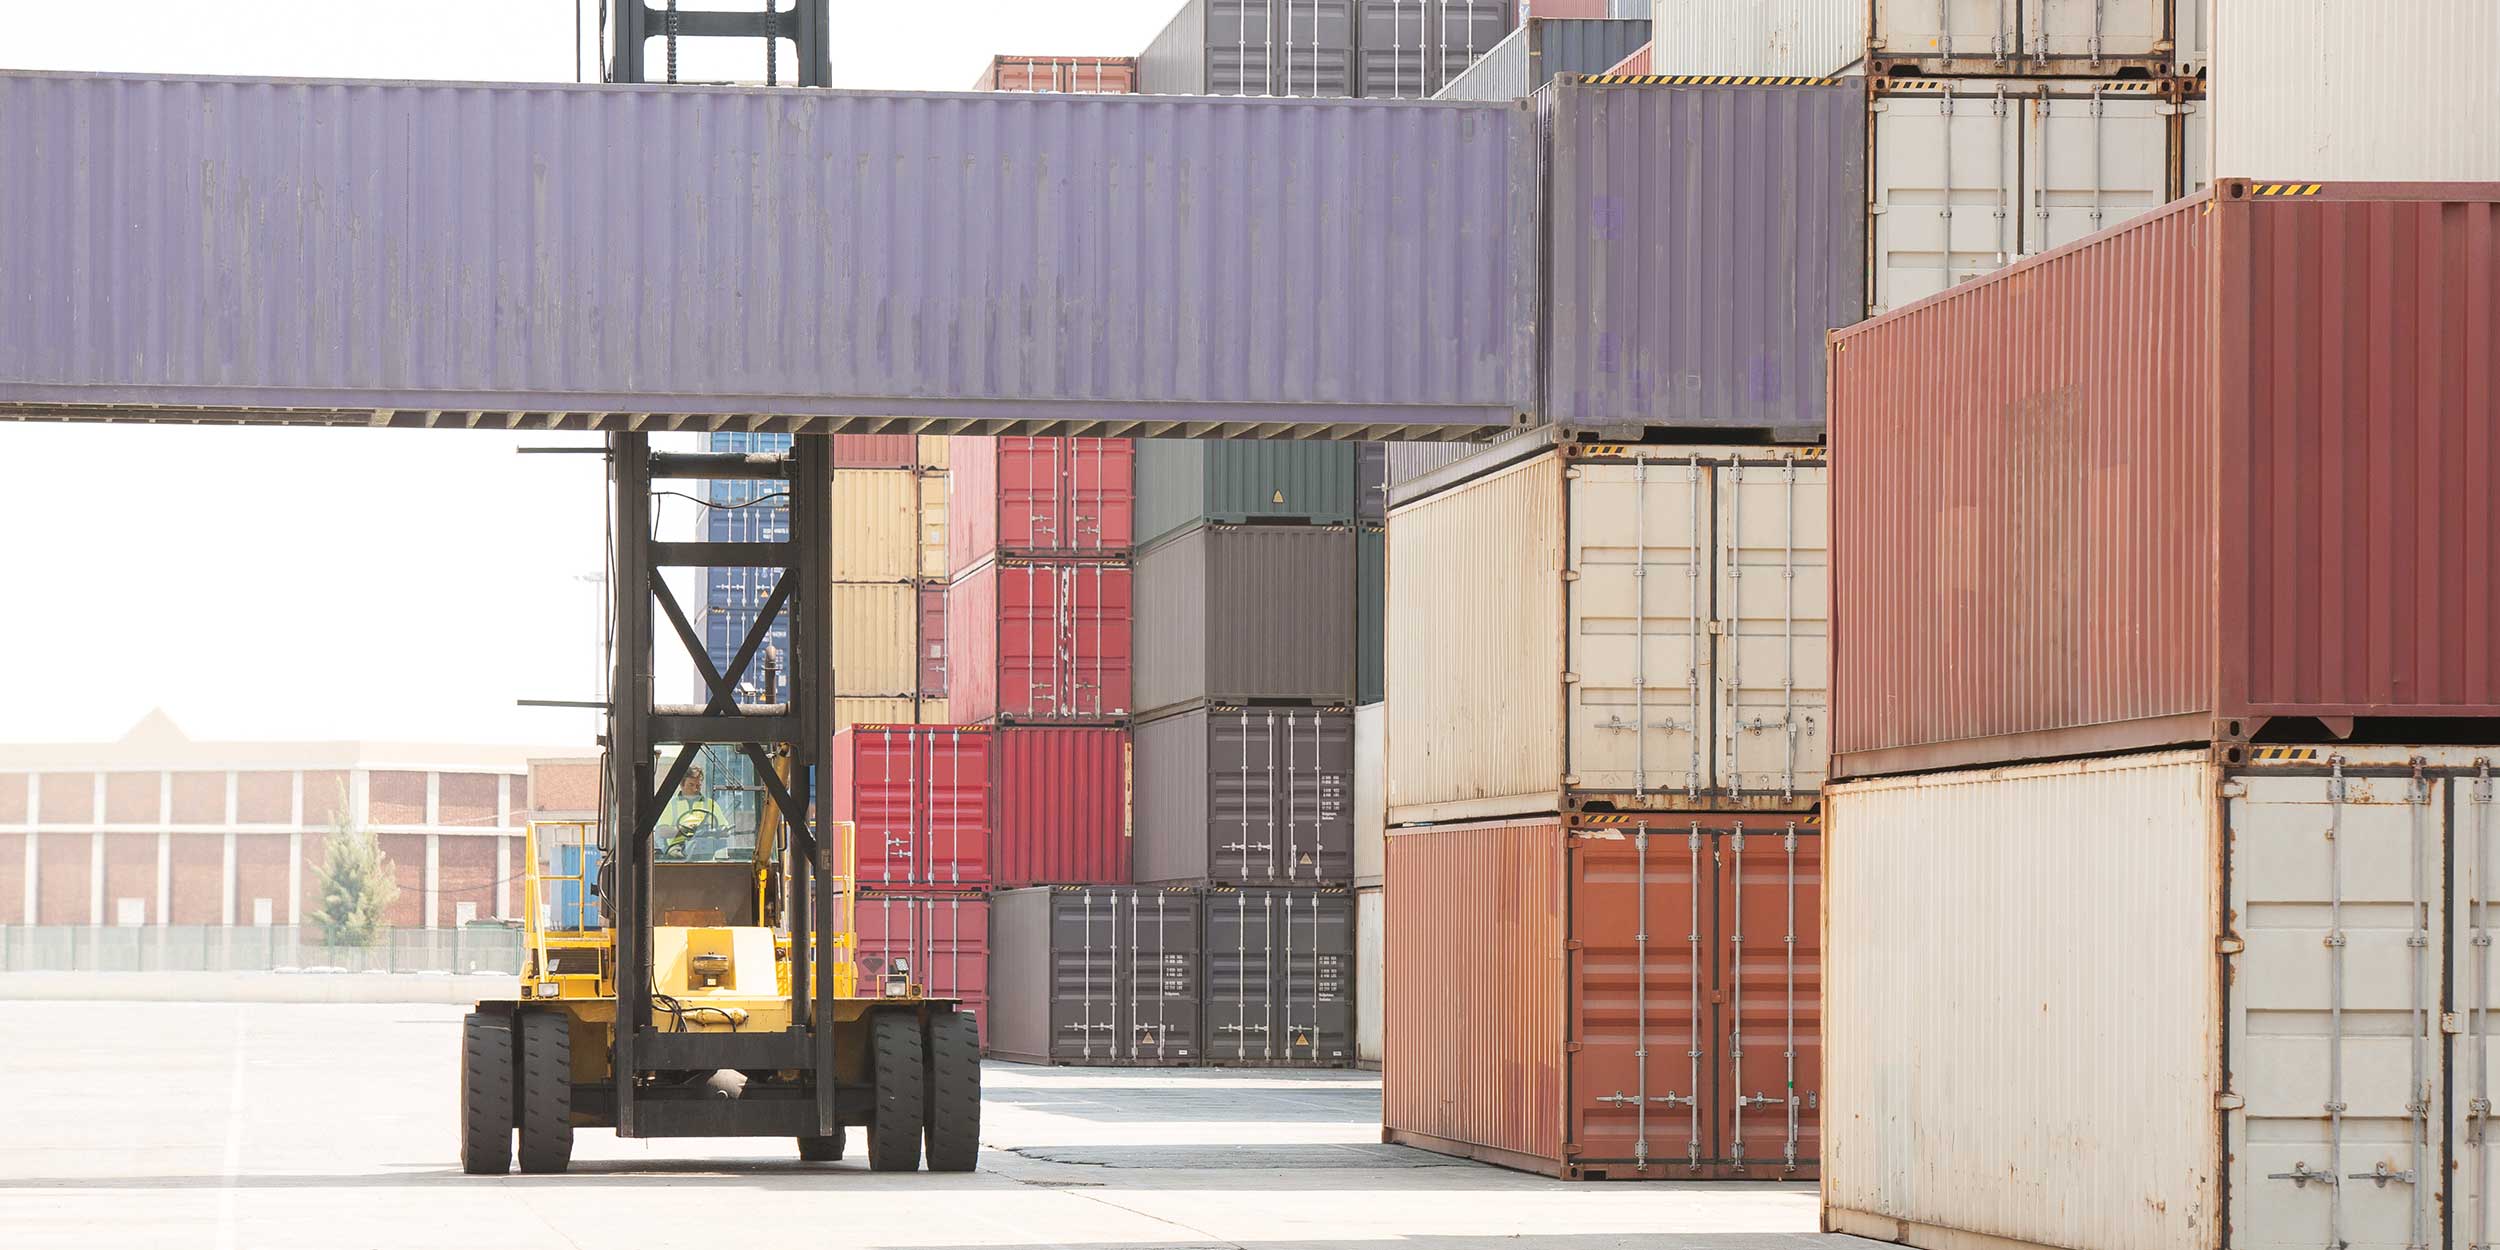 Containers and forklift